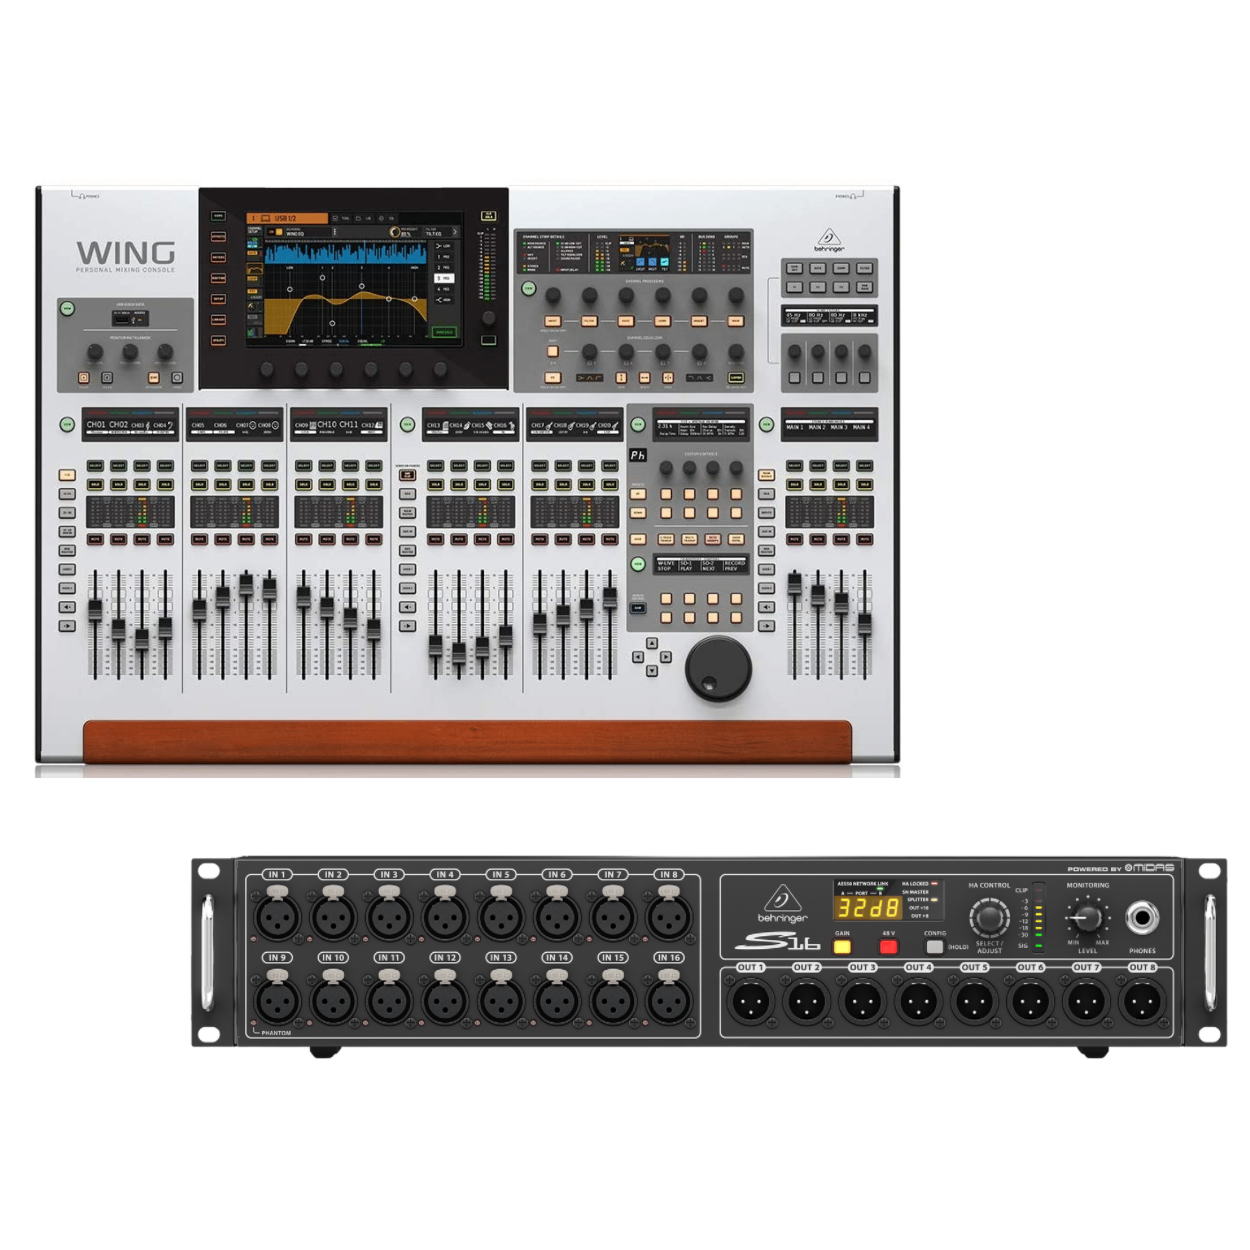 Behringer WING 48-channel Digital Mixer with S16 16-channel Digital Snake (S-16) | BEHRINGER , Zoso Music